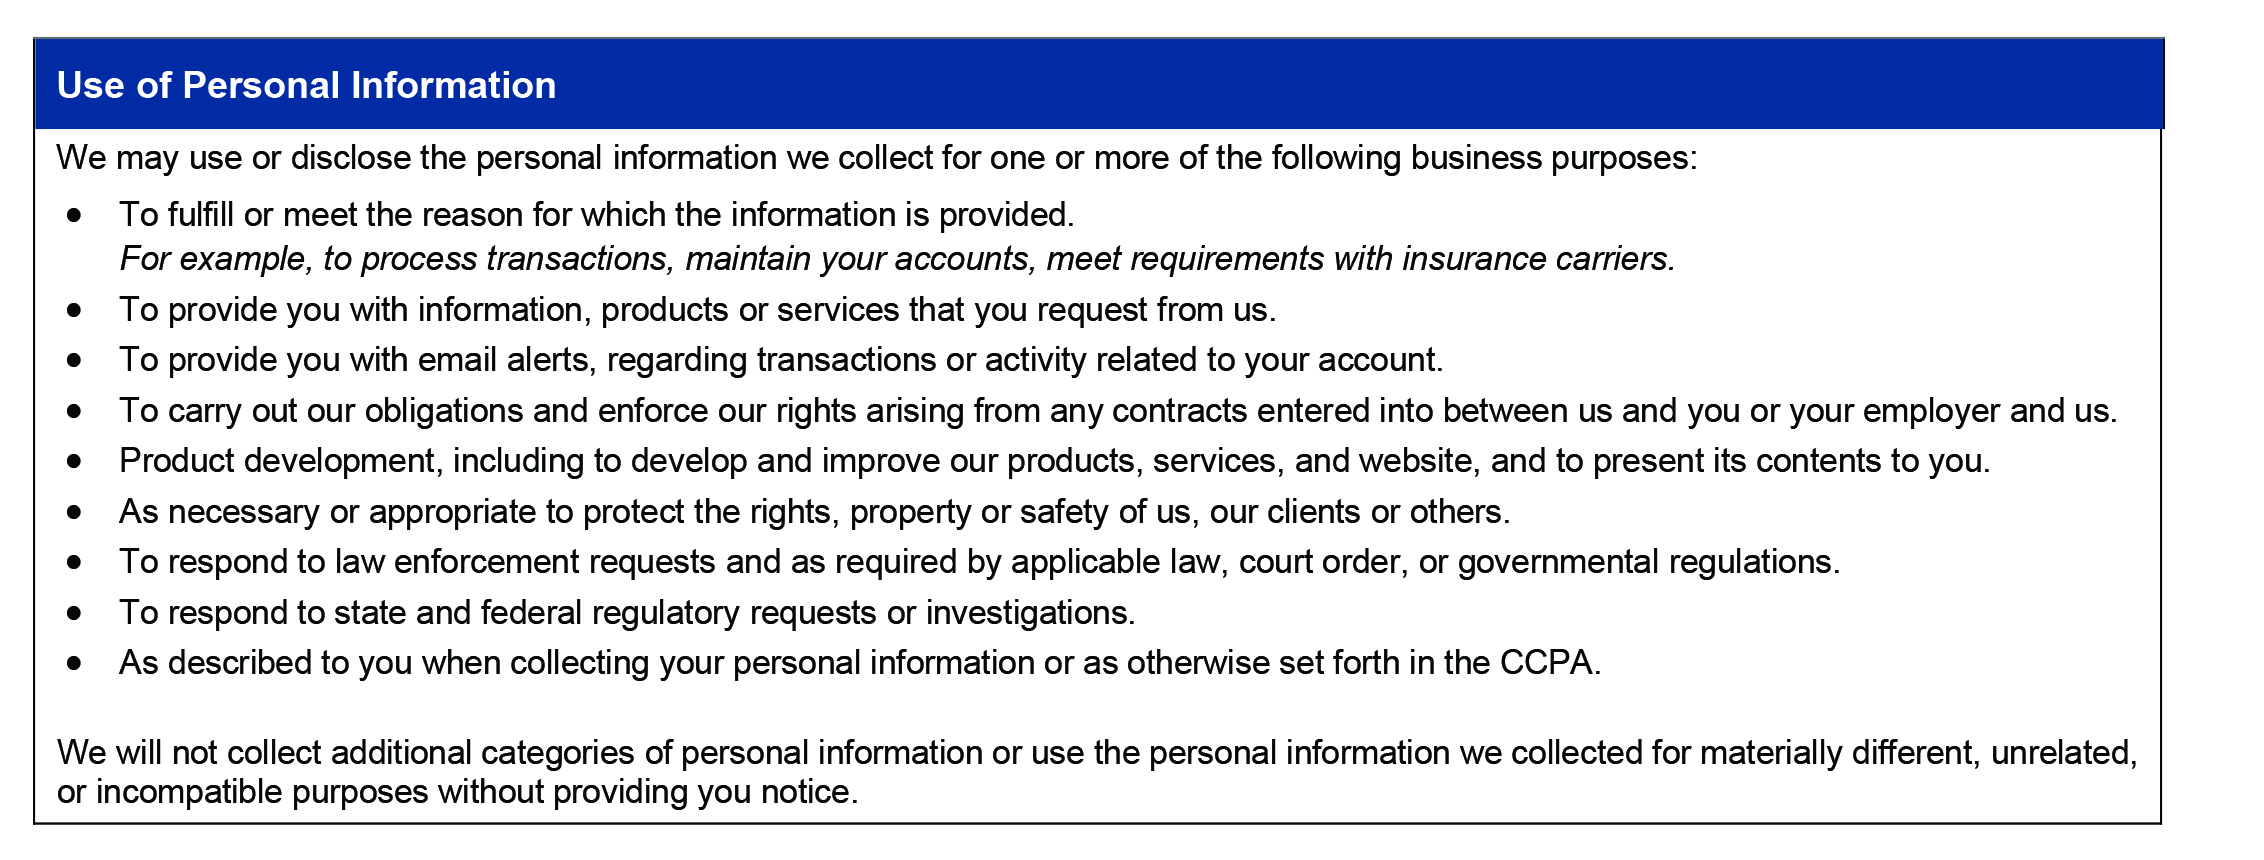 Newport California Consumer Privacy Act image four: Use of Personal Information